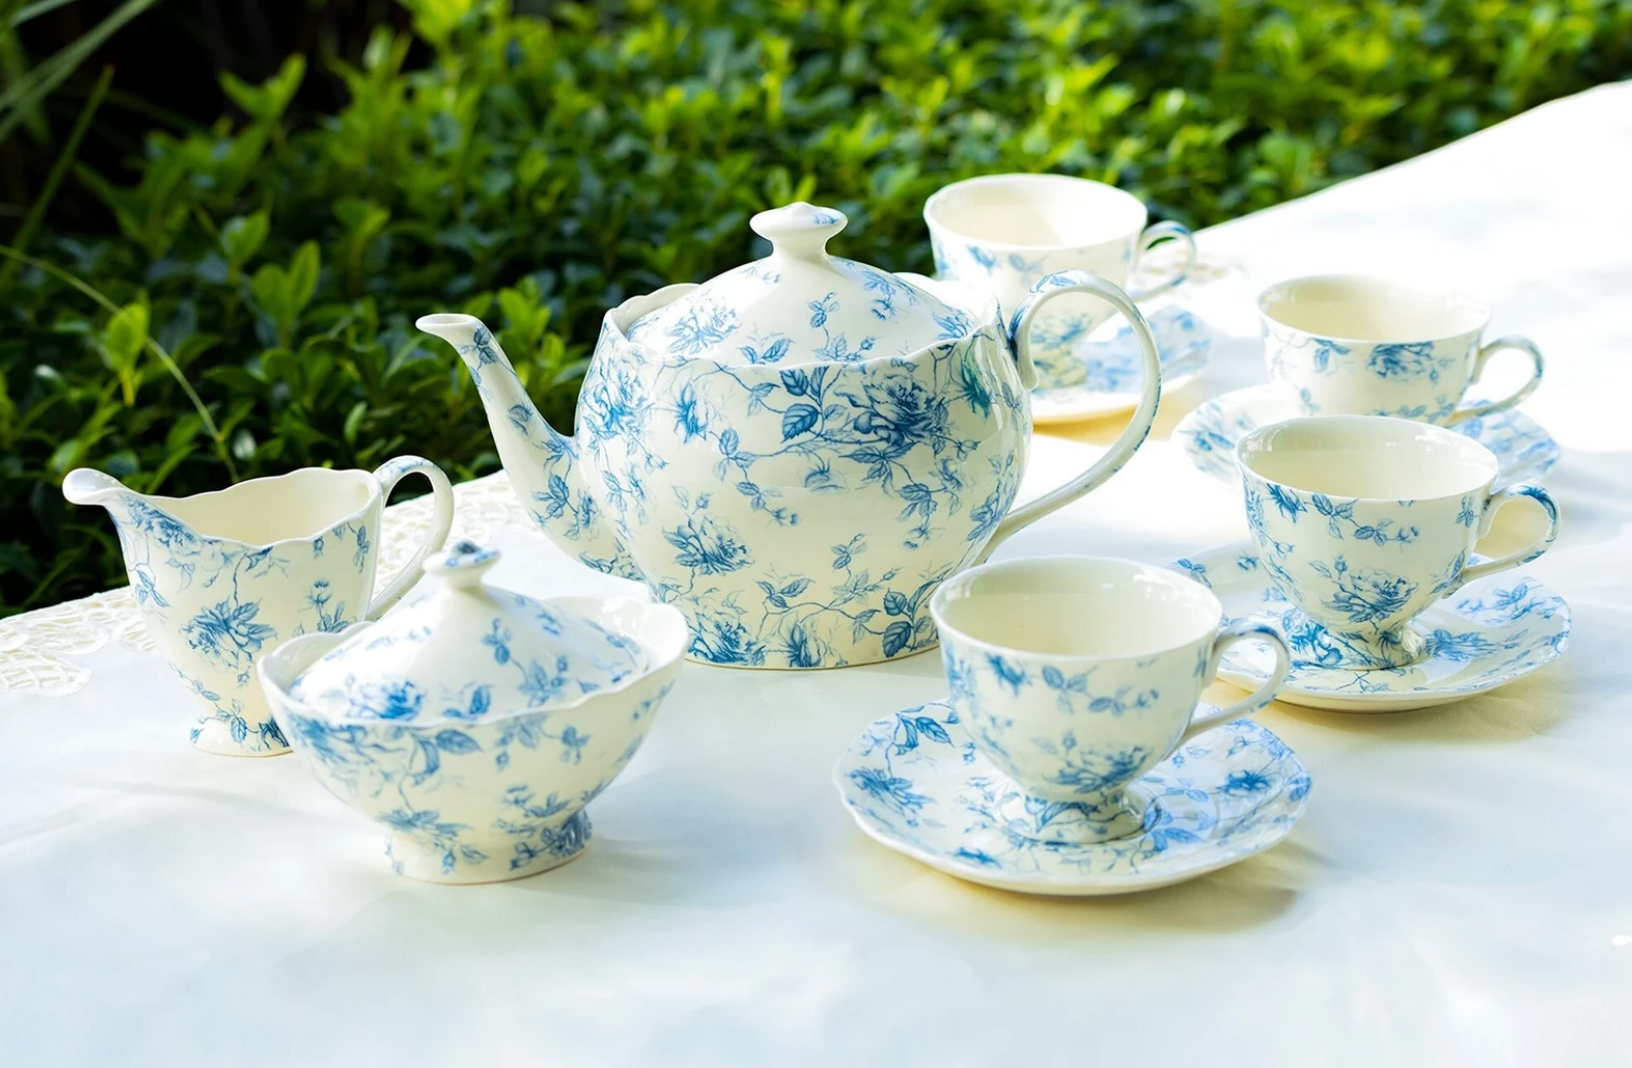 Blue and white floral porcelain tea set on a white tablecloth 